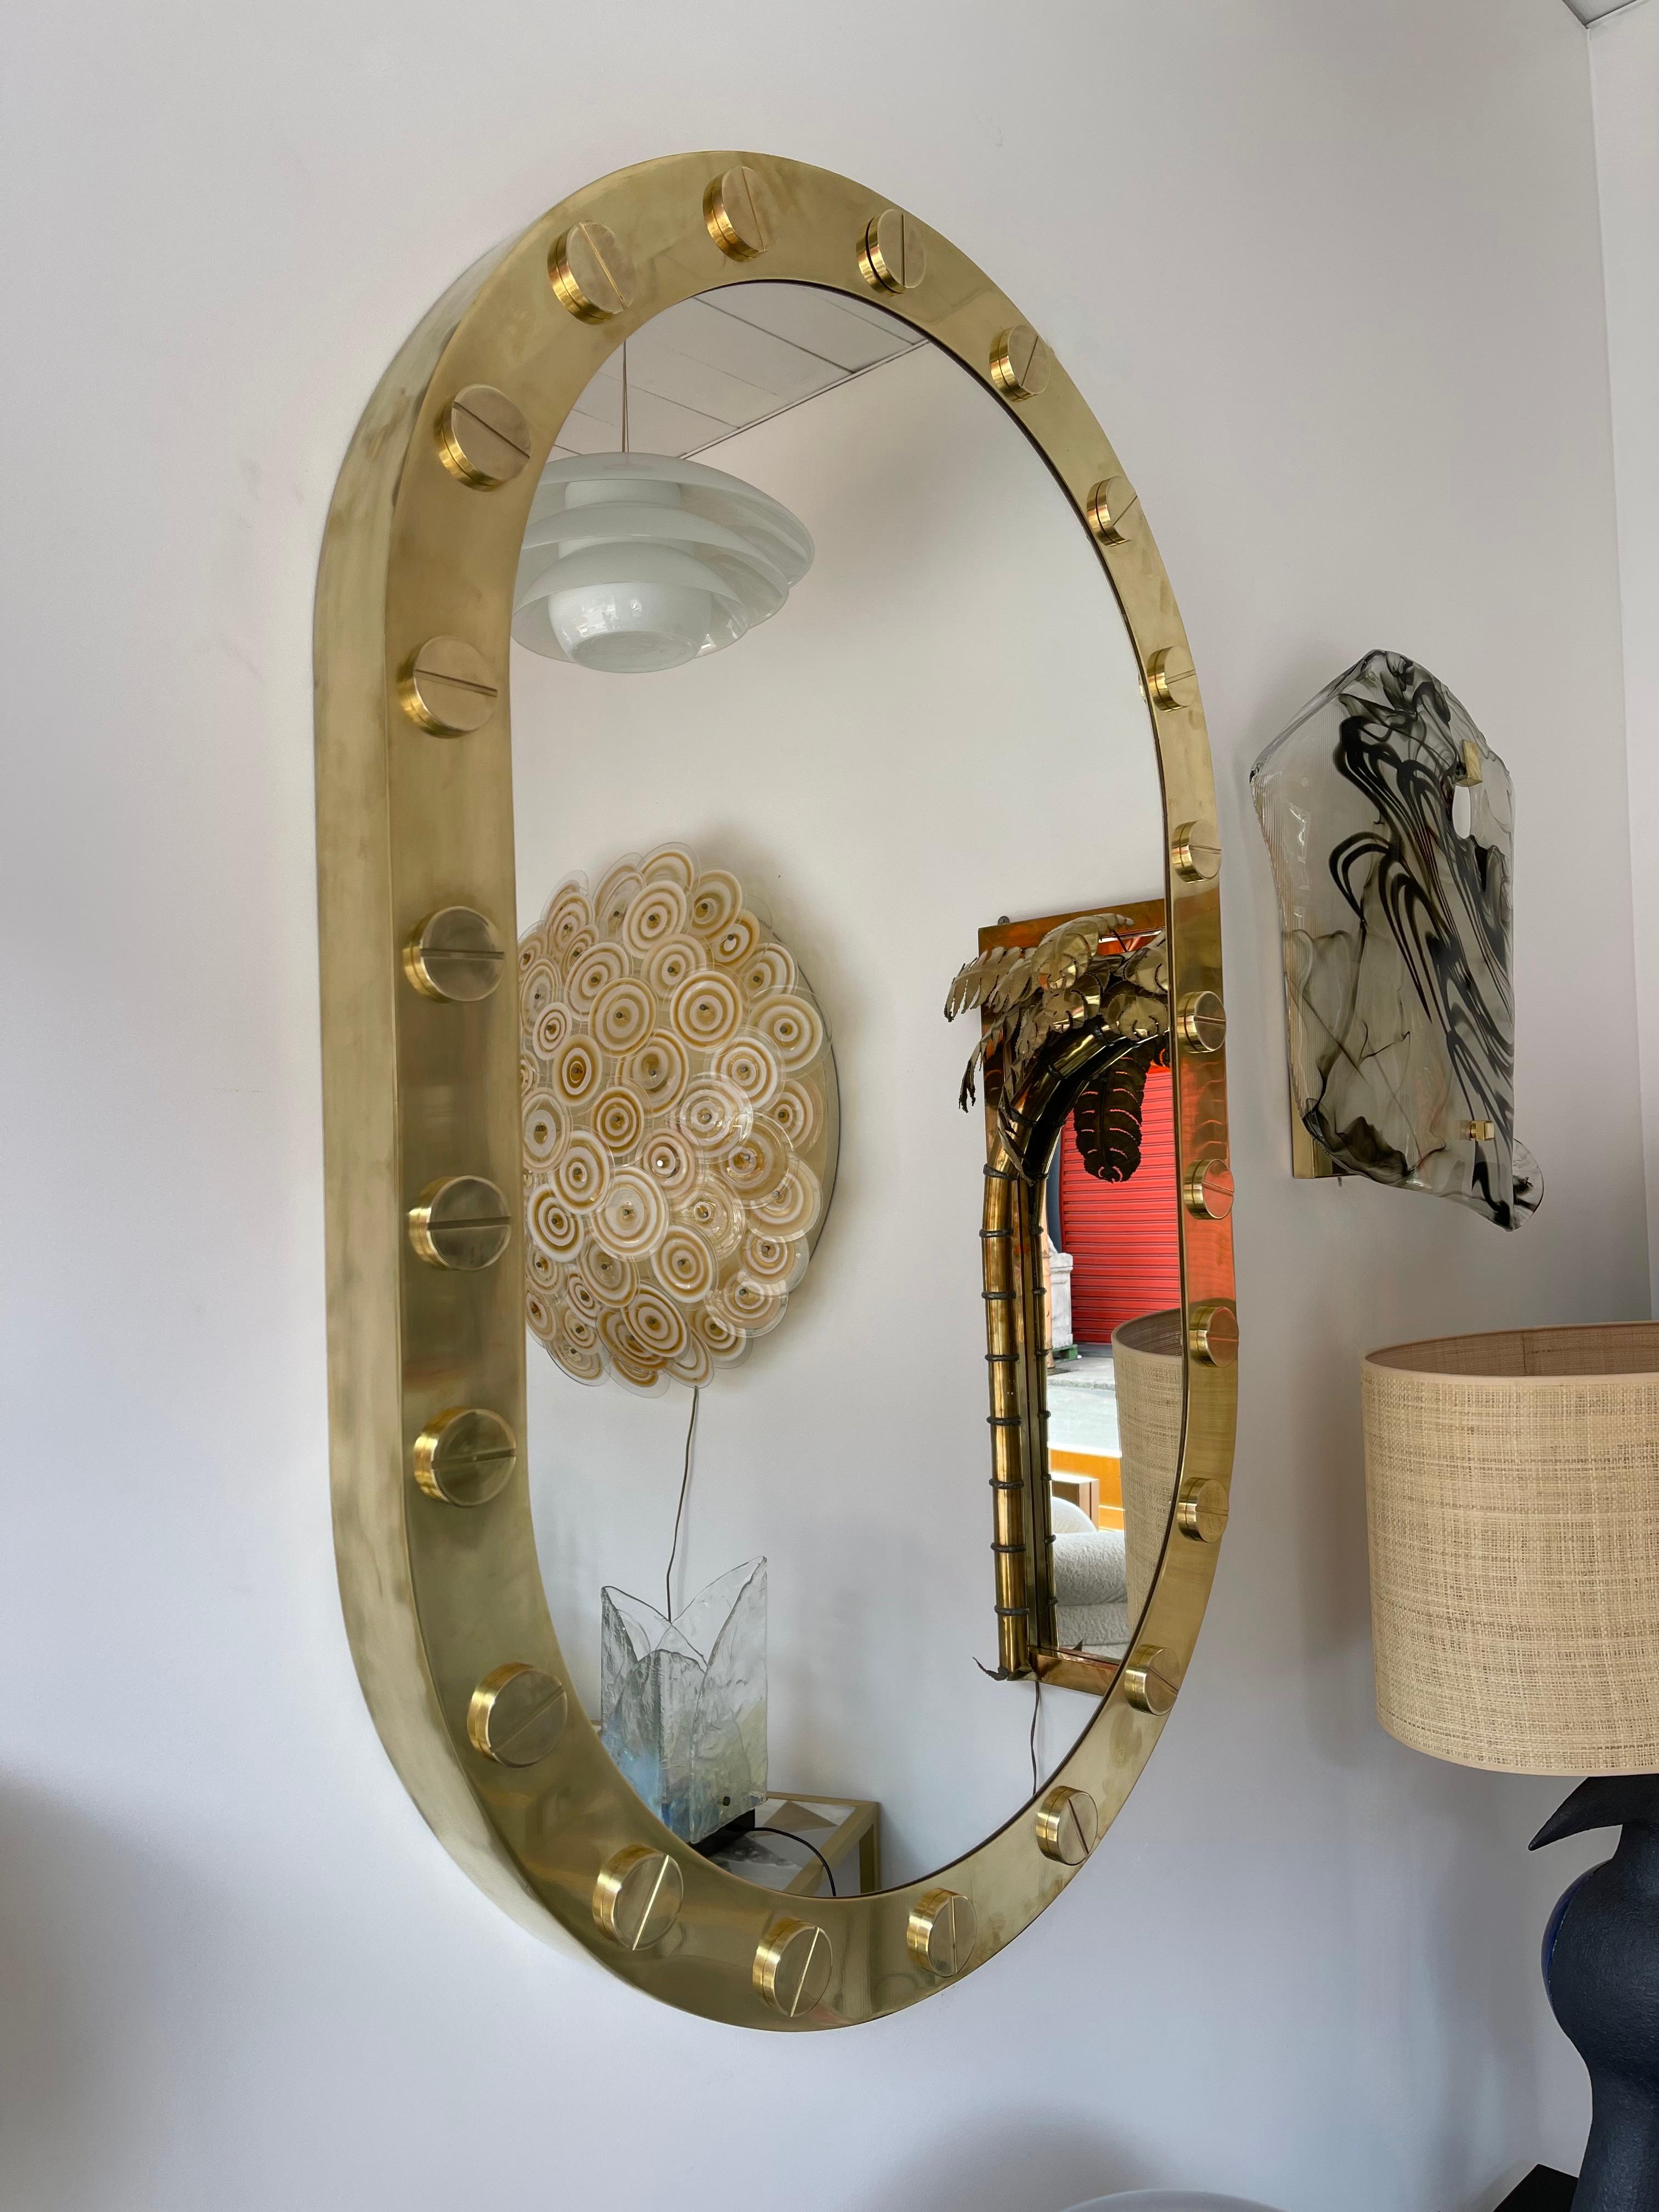 Massive thick side full brass wall mirror with large brass screw decor in the mood of Love Cartier, Mid-Century Modern style, Hollywood Regency, Space Age.